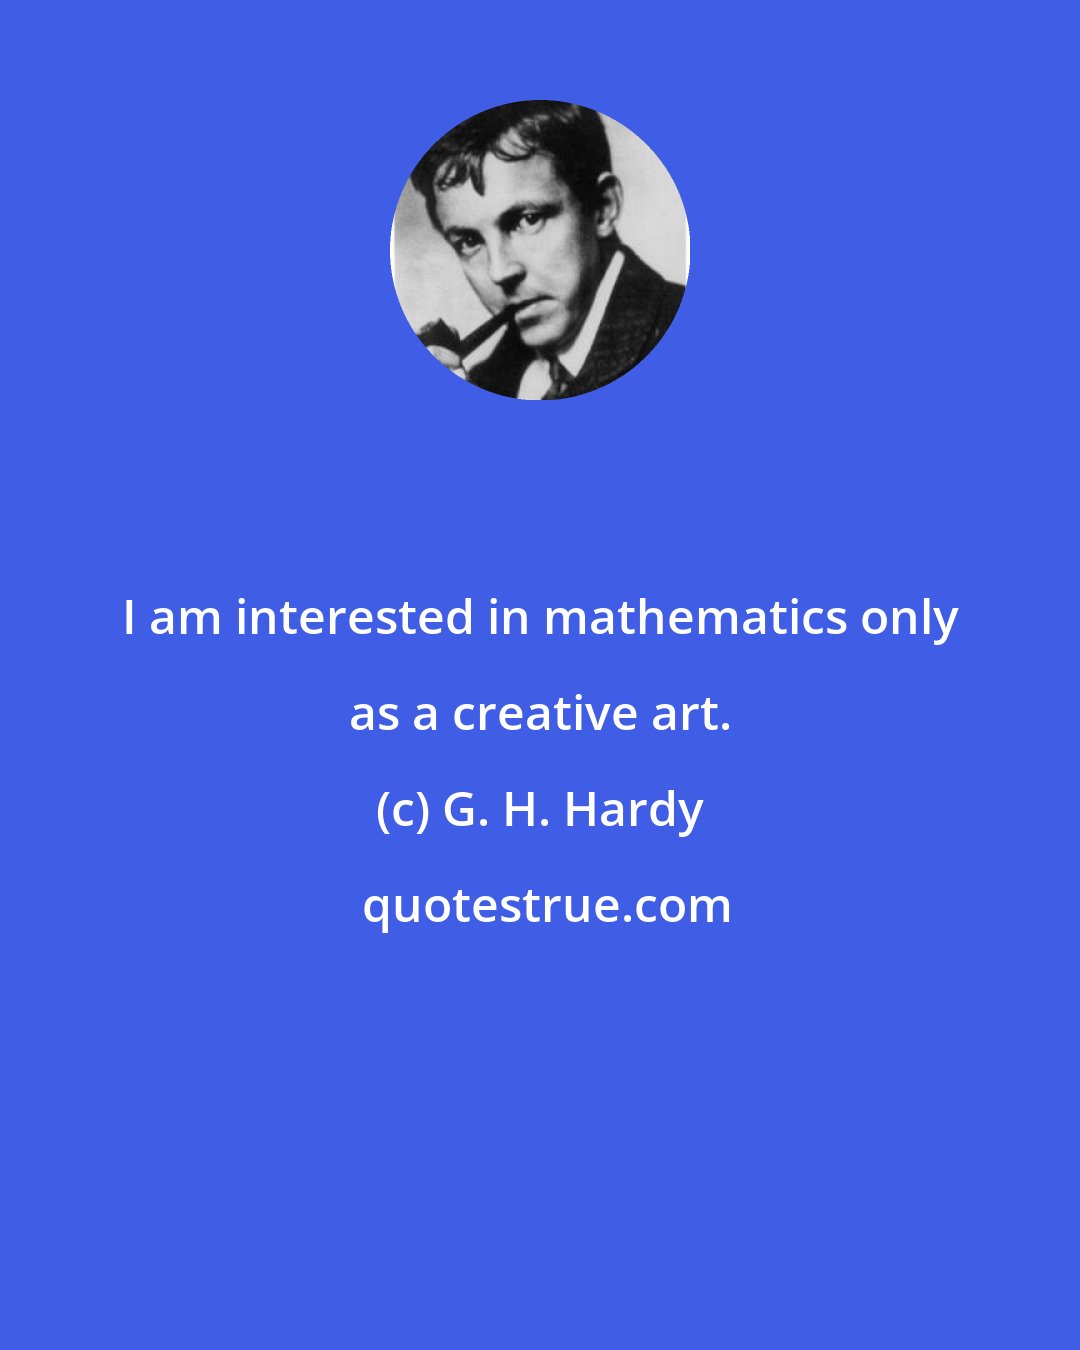 G. H. Hardy: I am interested in mathematics only as a creative art.